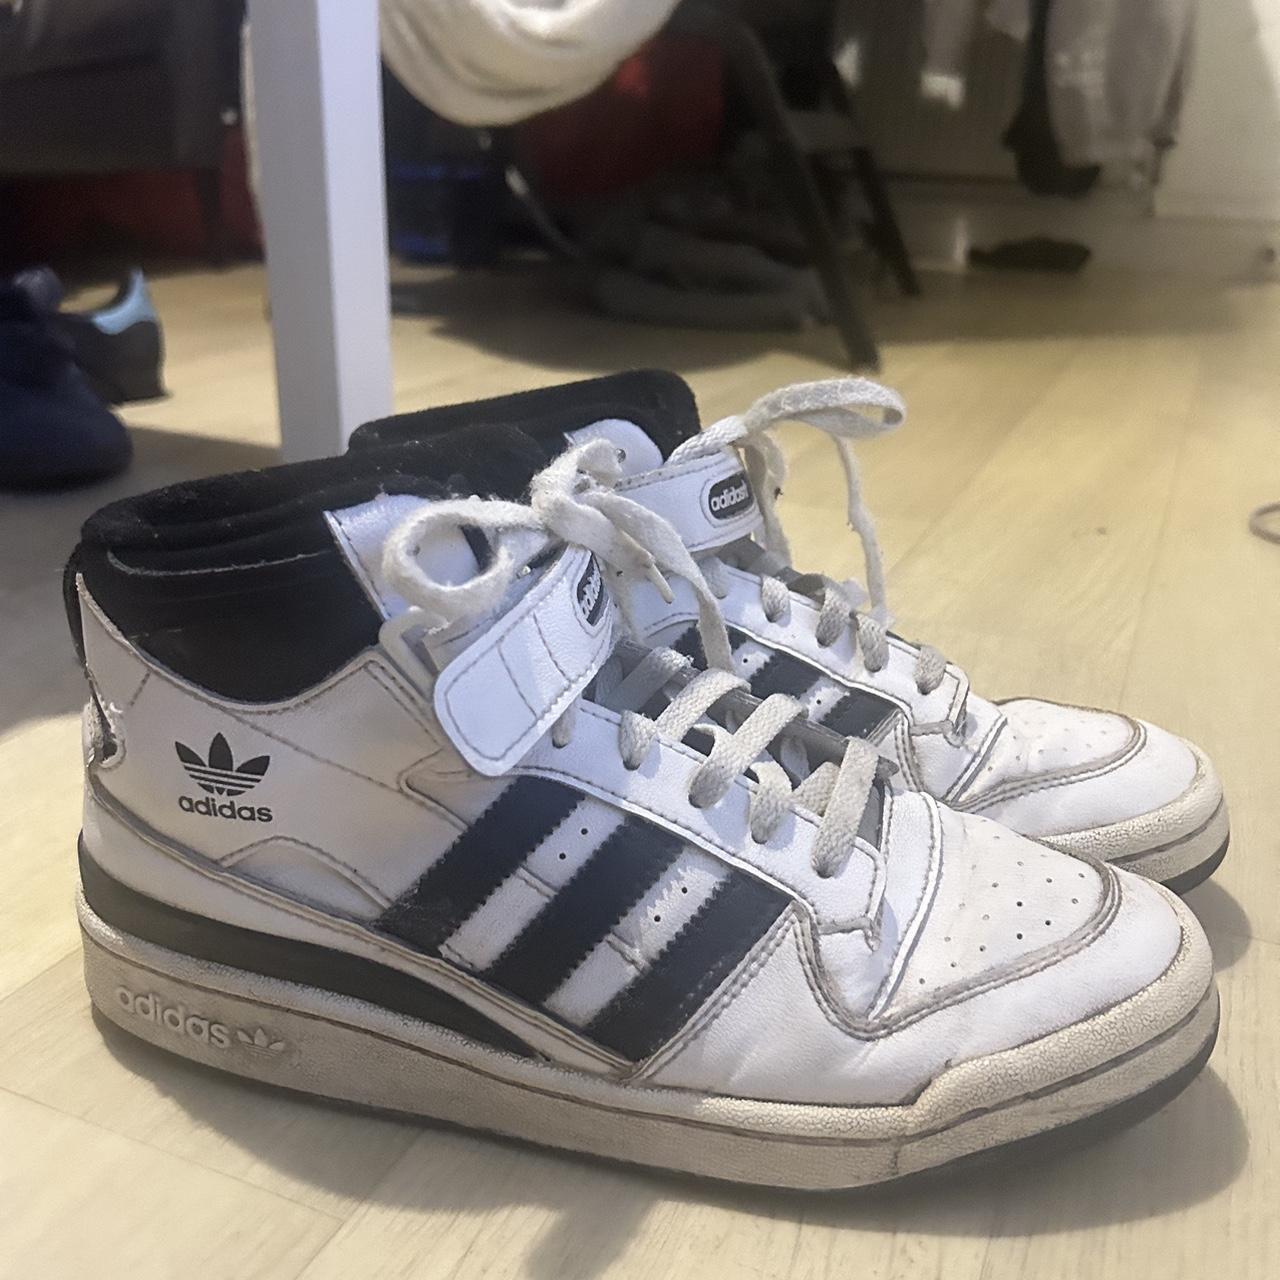 Adidas Original Forums Mid Trainers One of the... - Depop